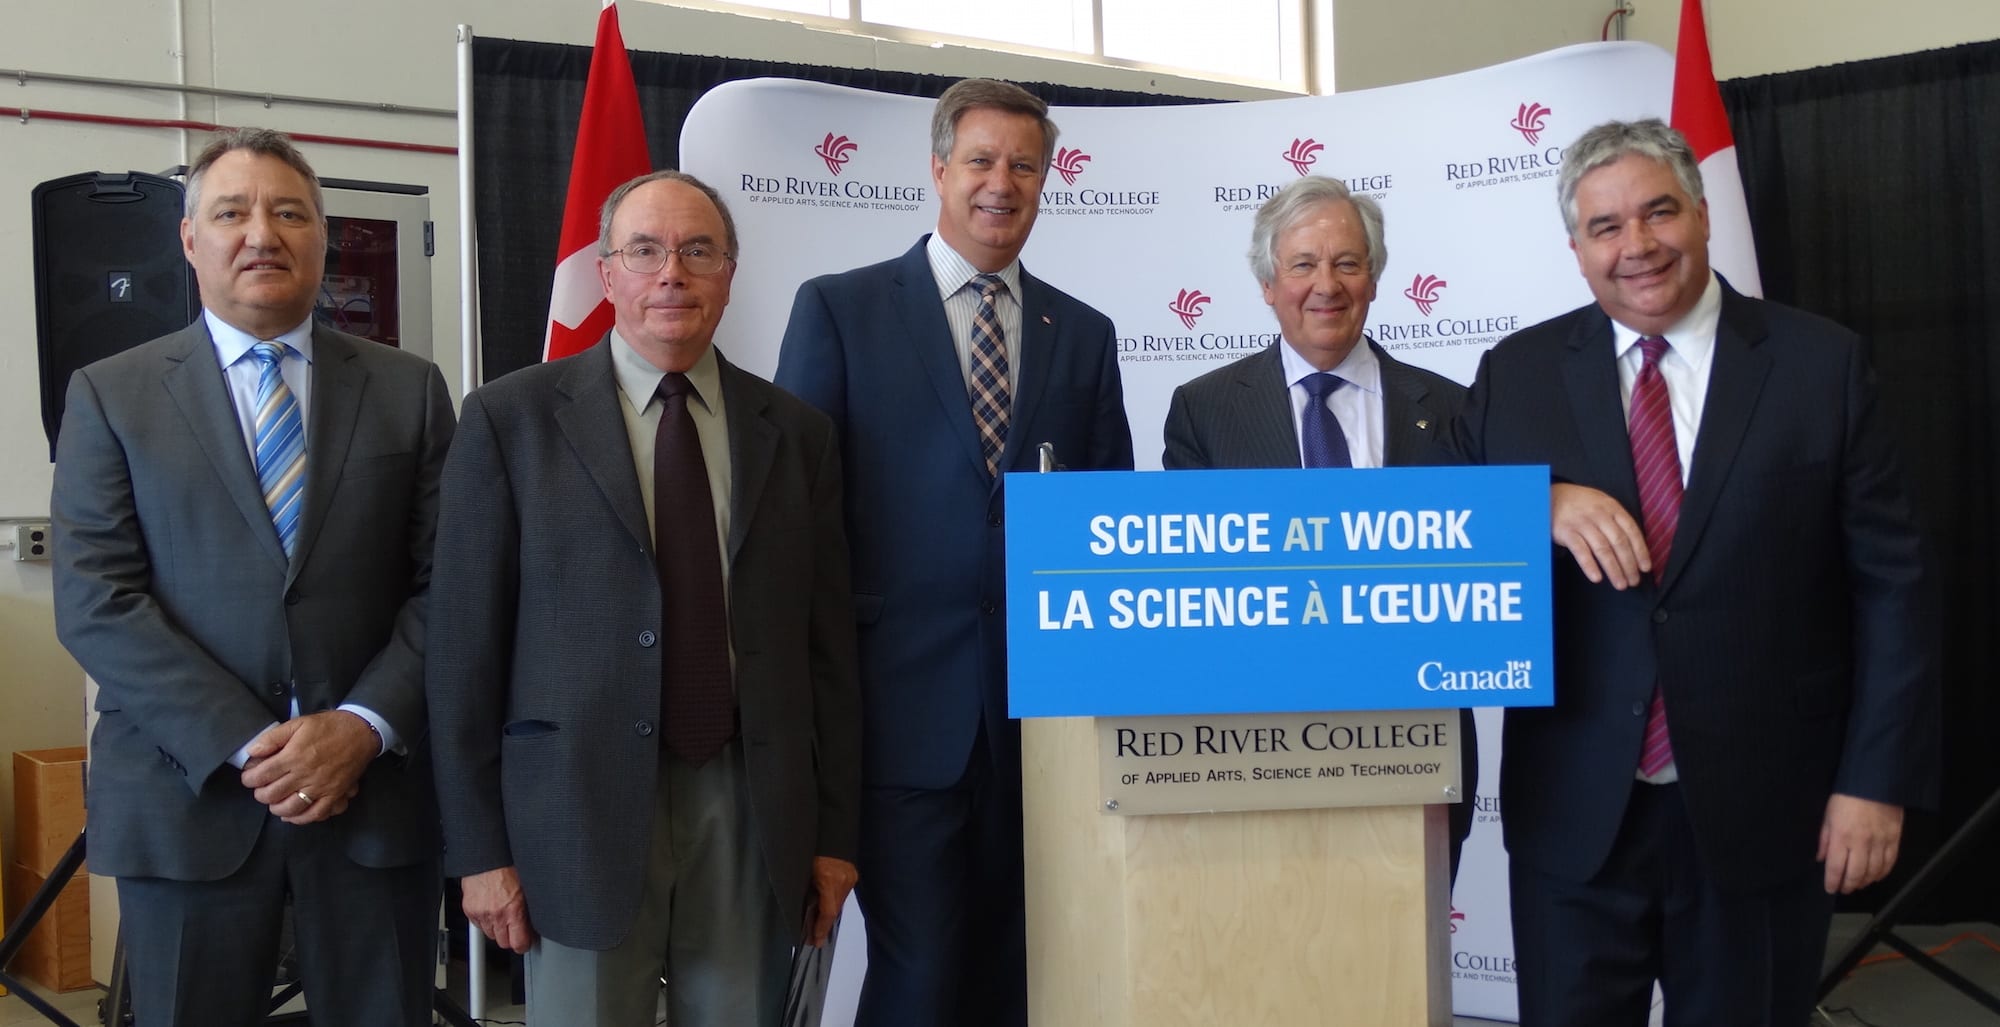 (L-R): Rick Marshall, Bird Construction; David Stones, CBEP Advisory Board Chair; Lawrence Toet, MP for Elmwood-Transona; David Rew, interim President of Red River College; Hon. Peter Van Loan, Leader of the Government in the House of Commons.